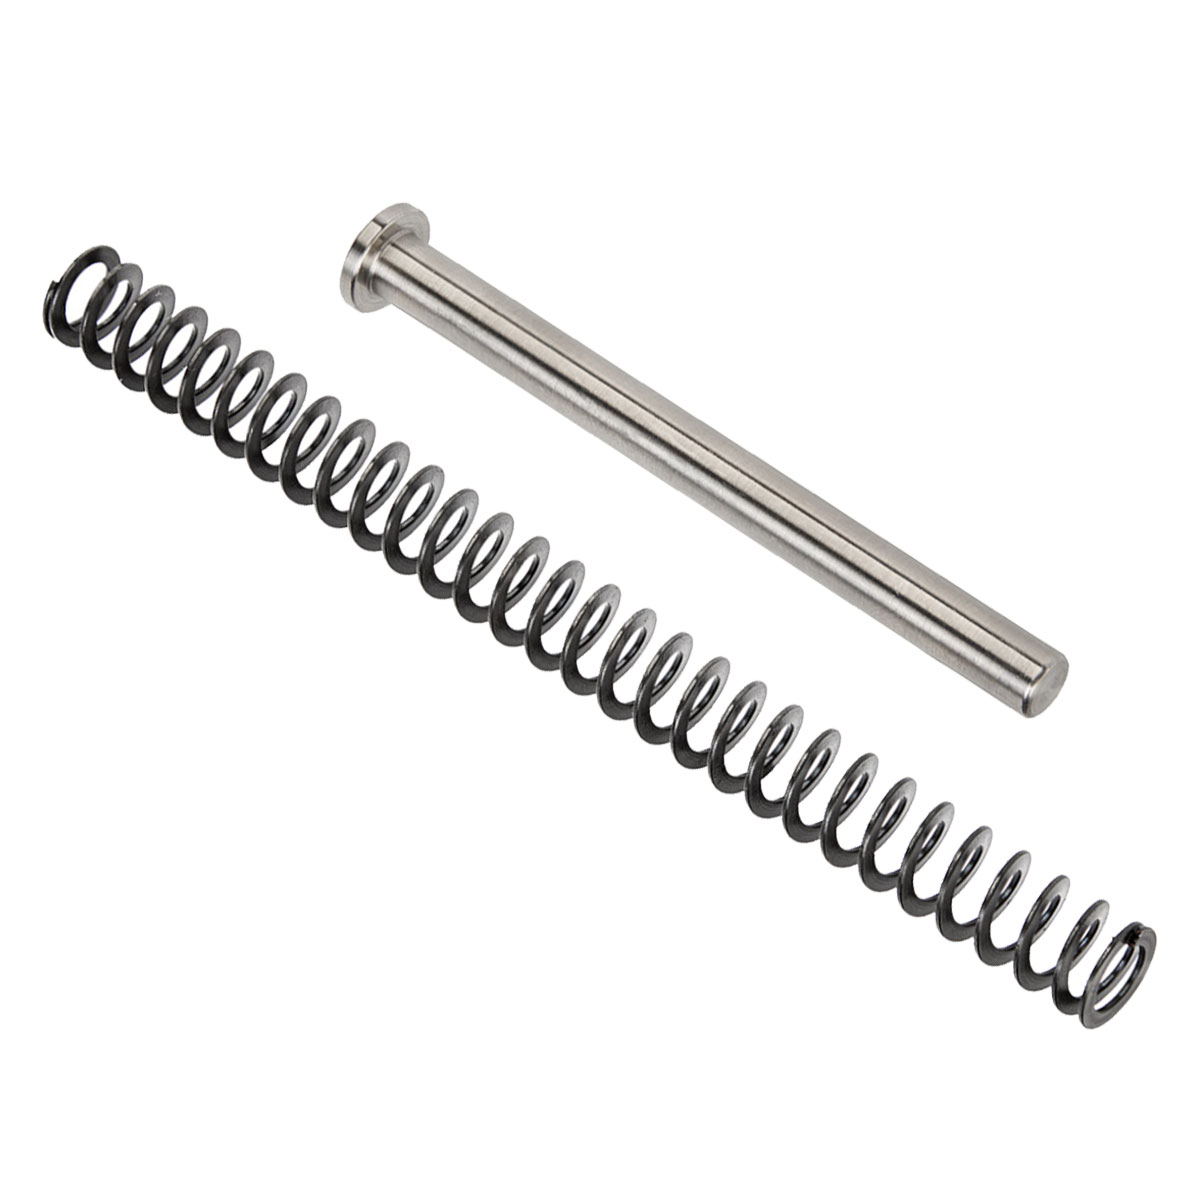 NDZ Performance GLOCK 17/19 GEN 1-3 19 23 32 38 NON CAPTURED GUIDE ROD ASSEMBLY - 15LBS SPRING